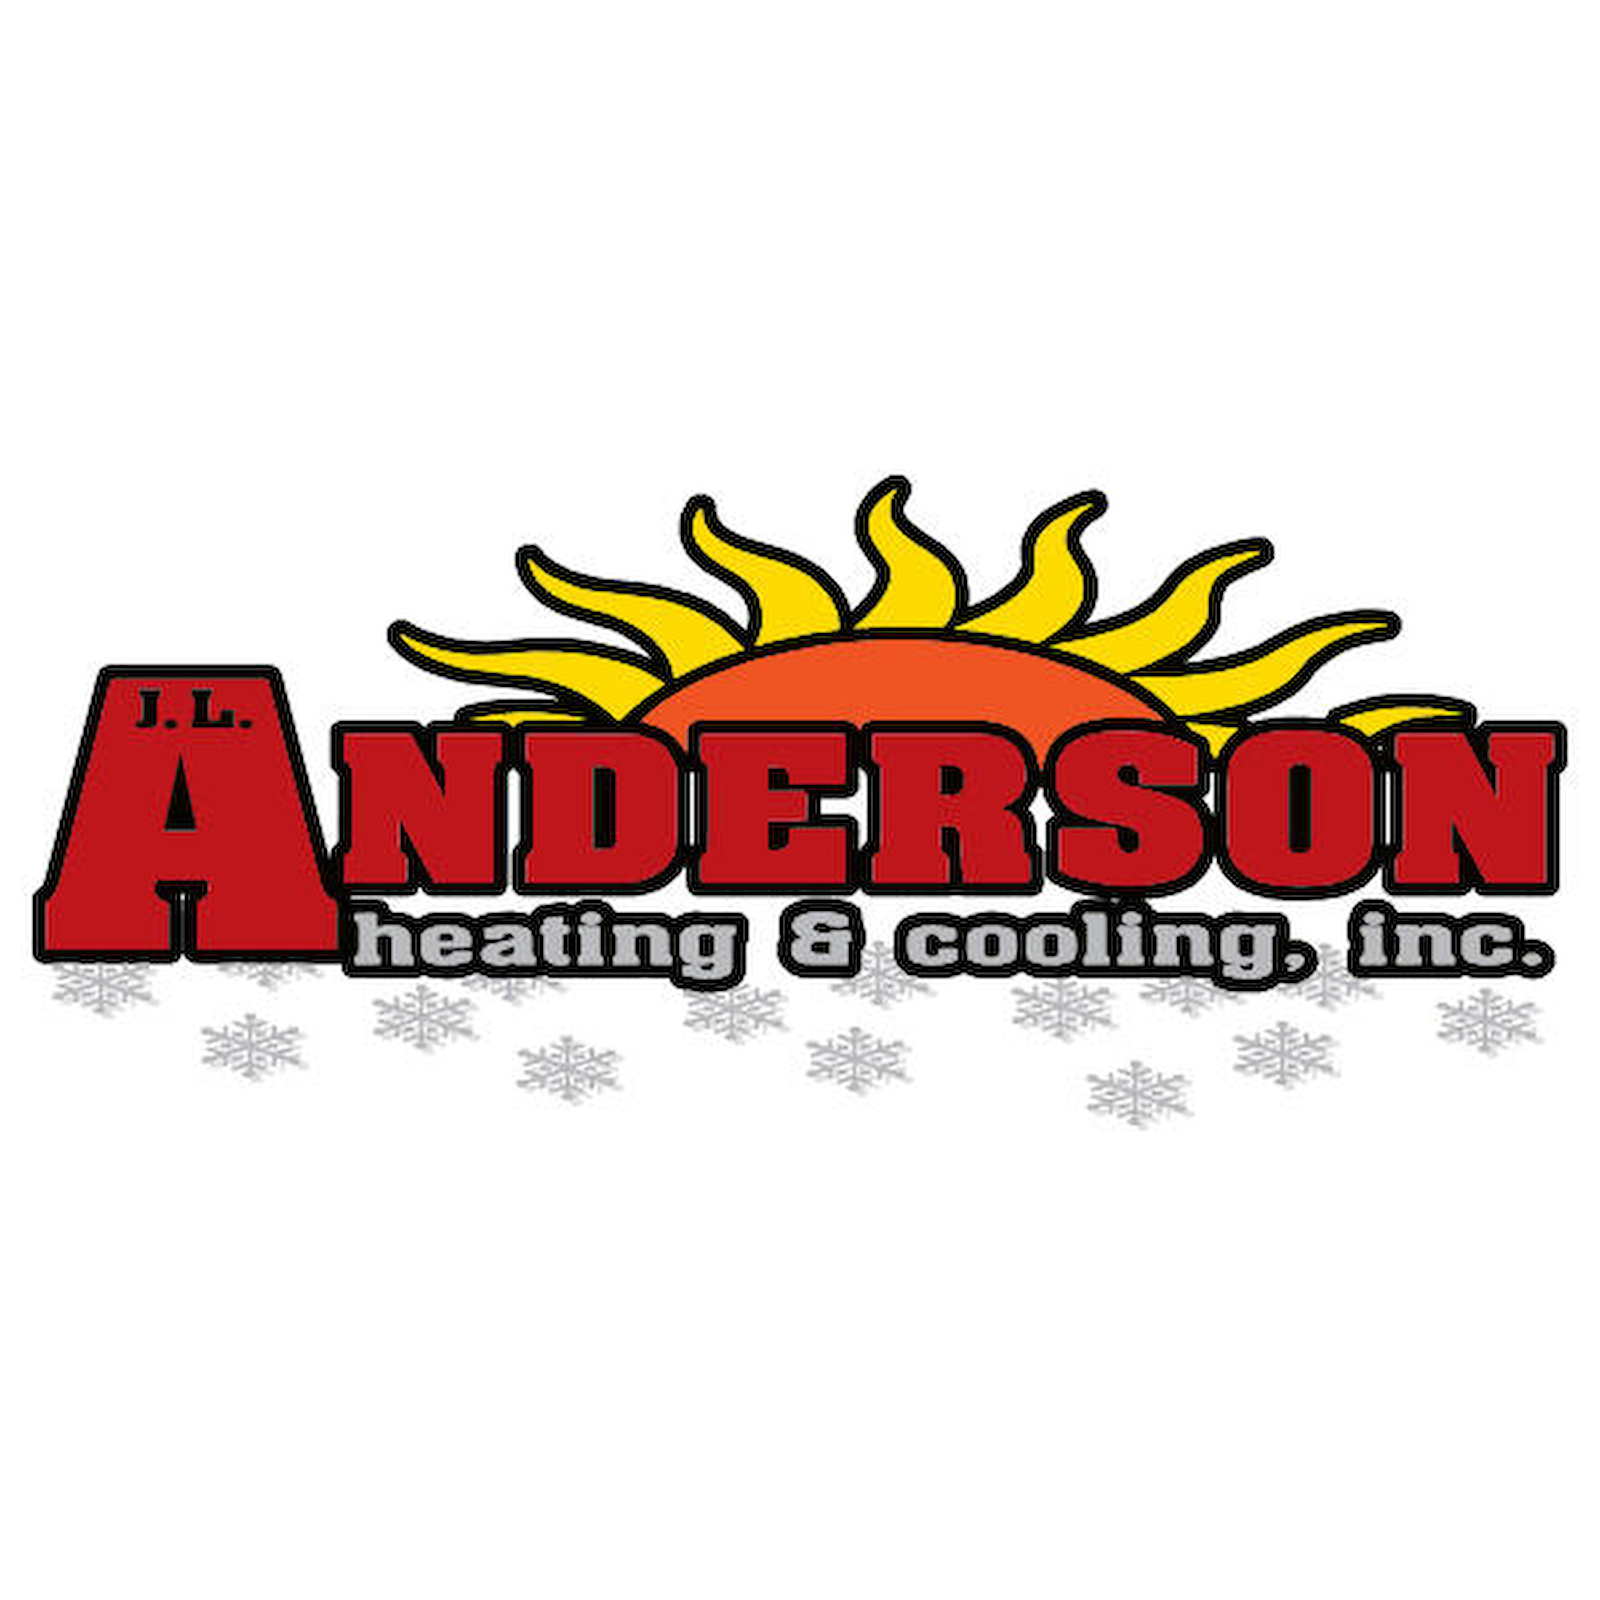 J.L Anderson Heating & Cooling